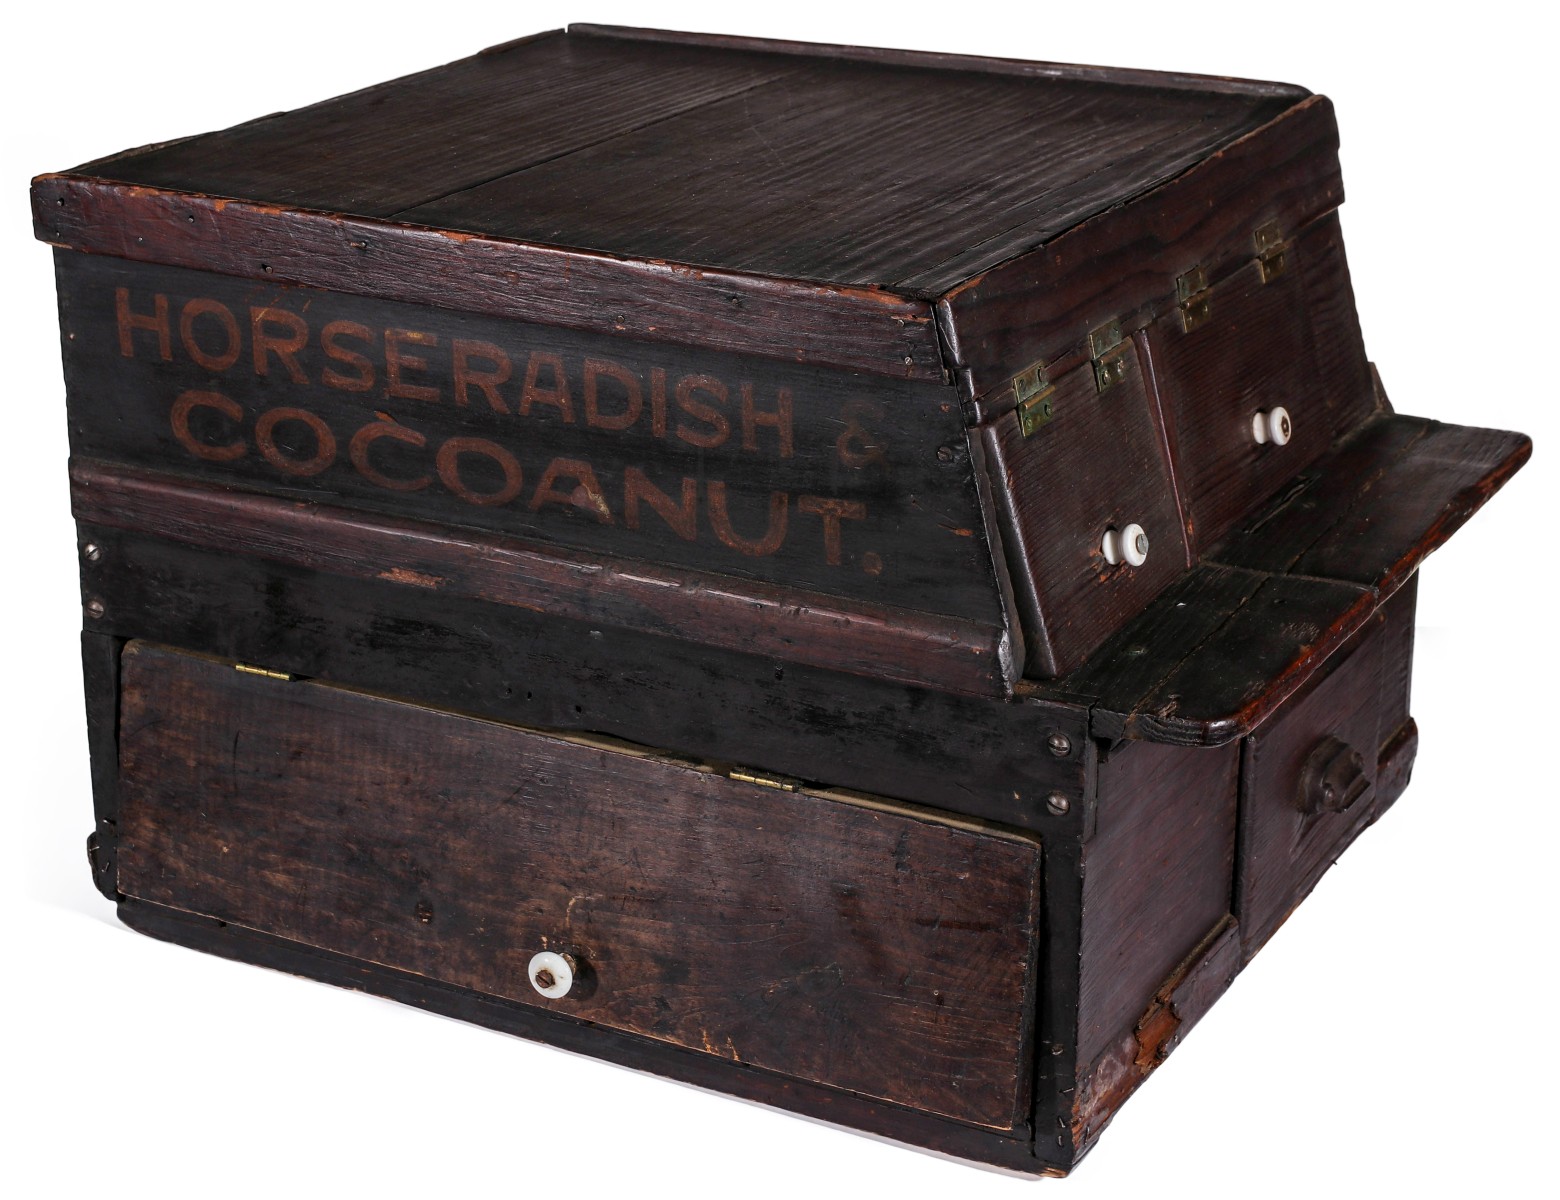 A PAINTED WOOD CONTAINER LETTERED HORSERADISH COCOANUT